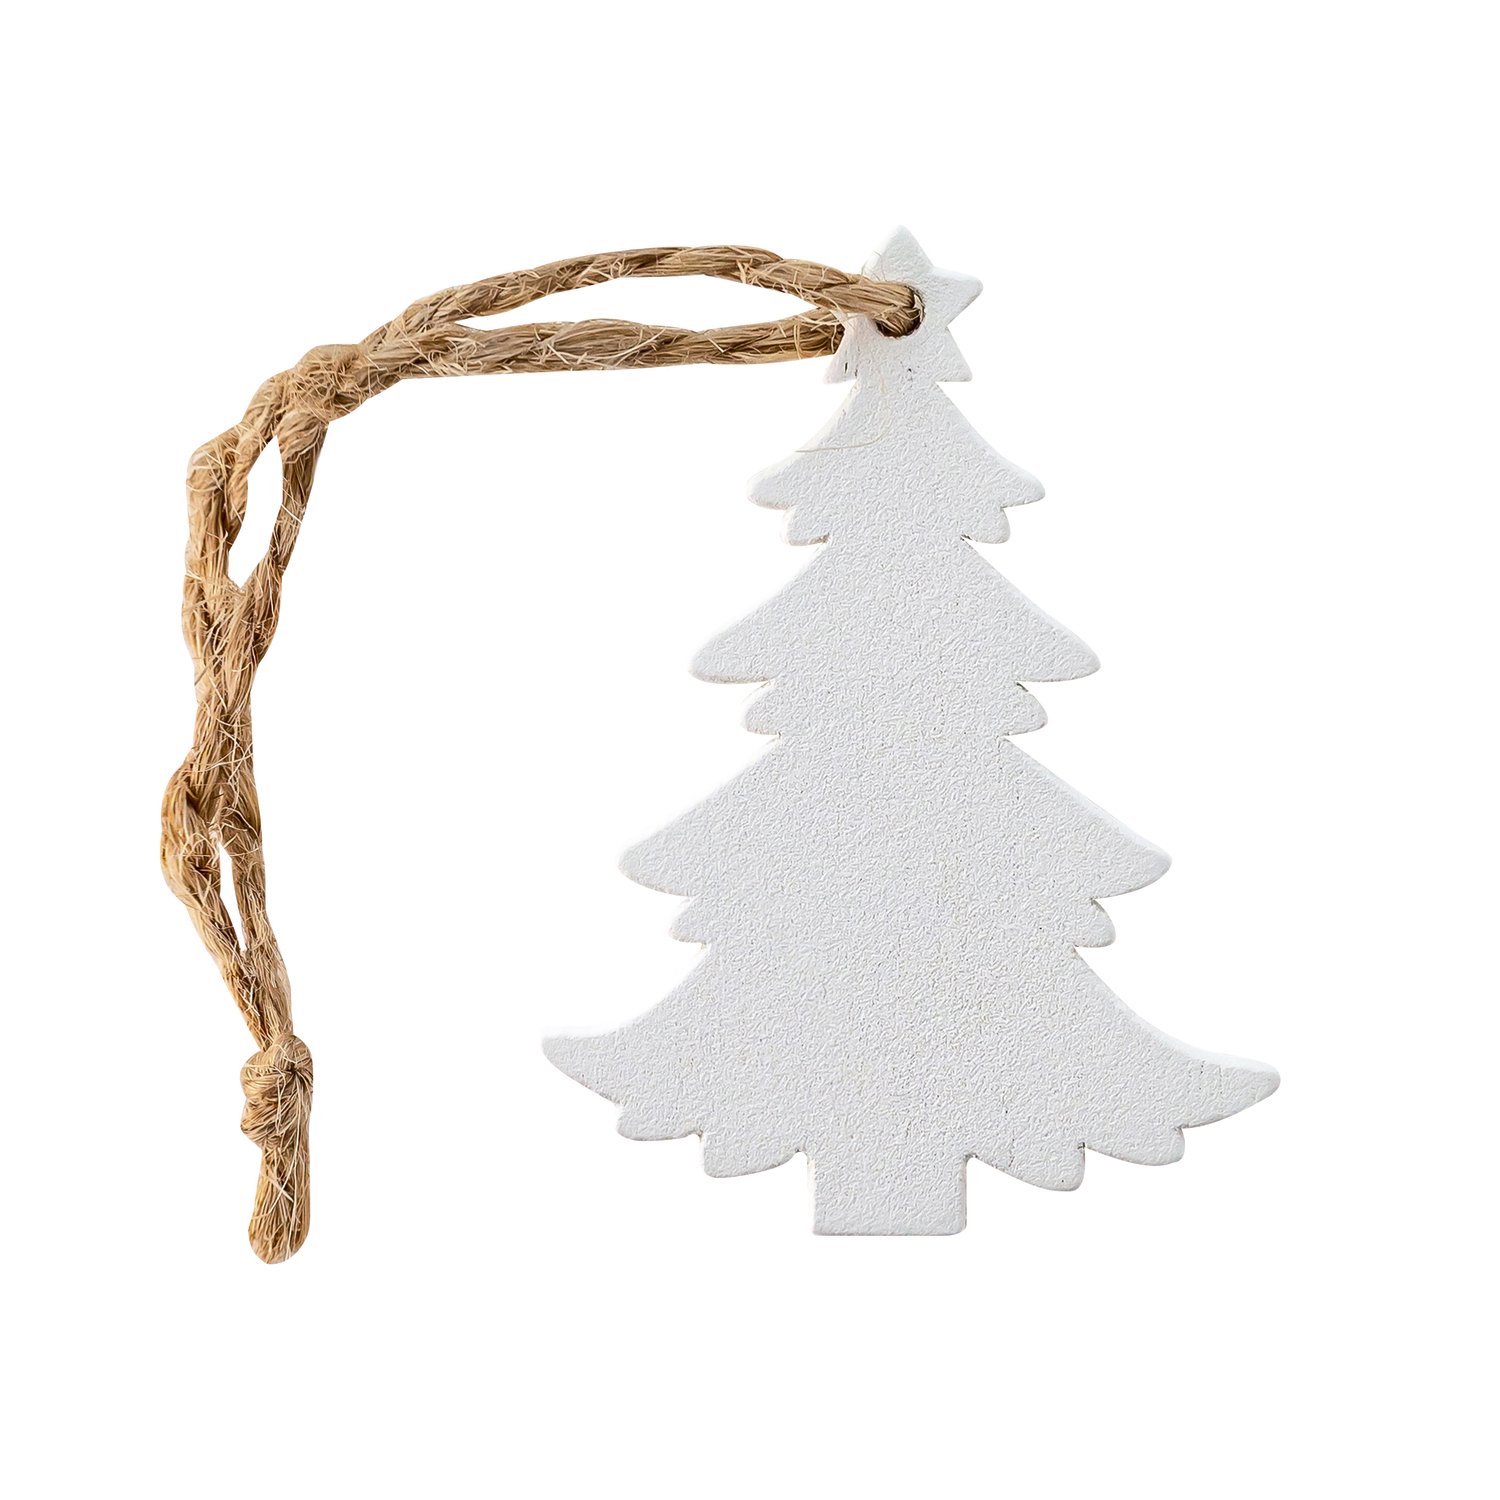 Wooden white tree hanger with rope loop 5 x 3.8cm - 24xpcs